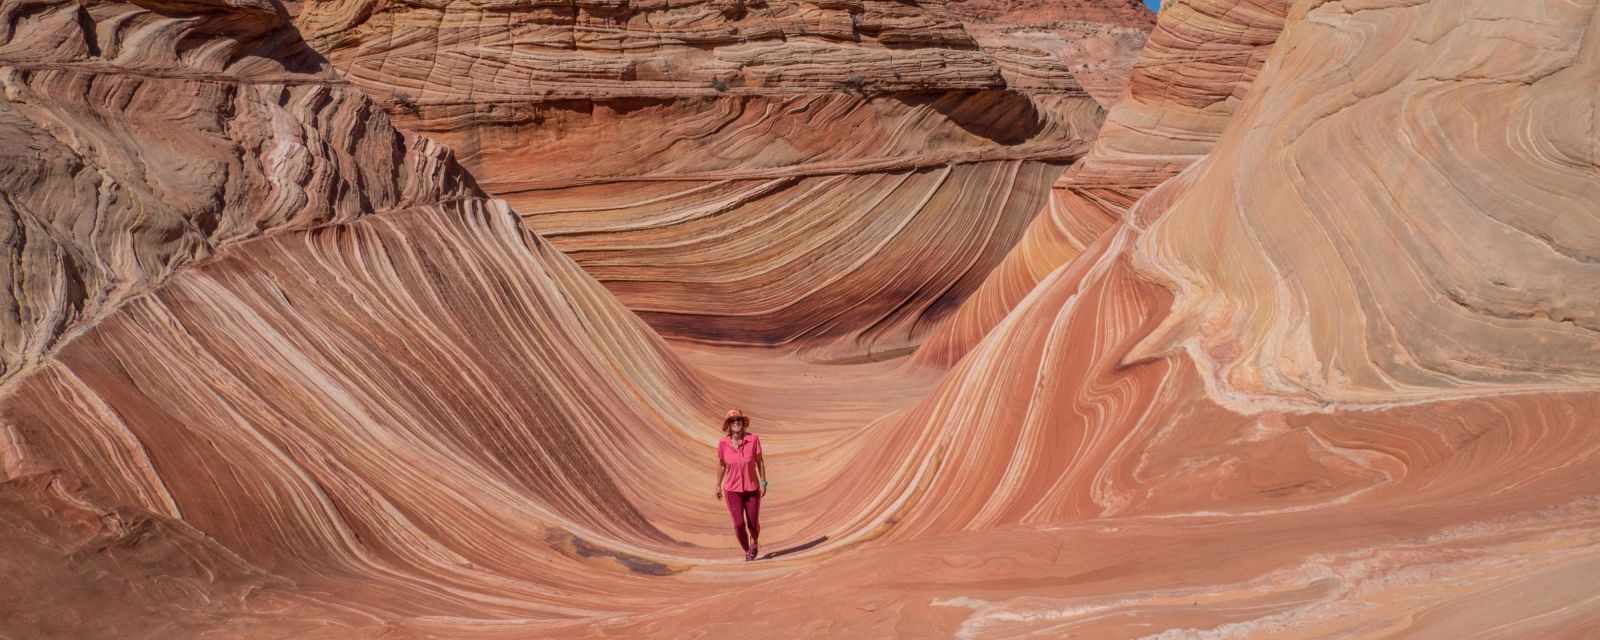 I walked through the Wave in Coyote Buttes North